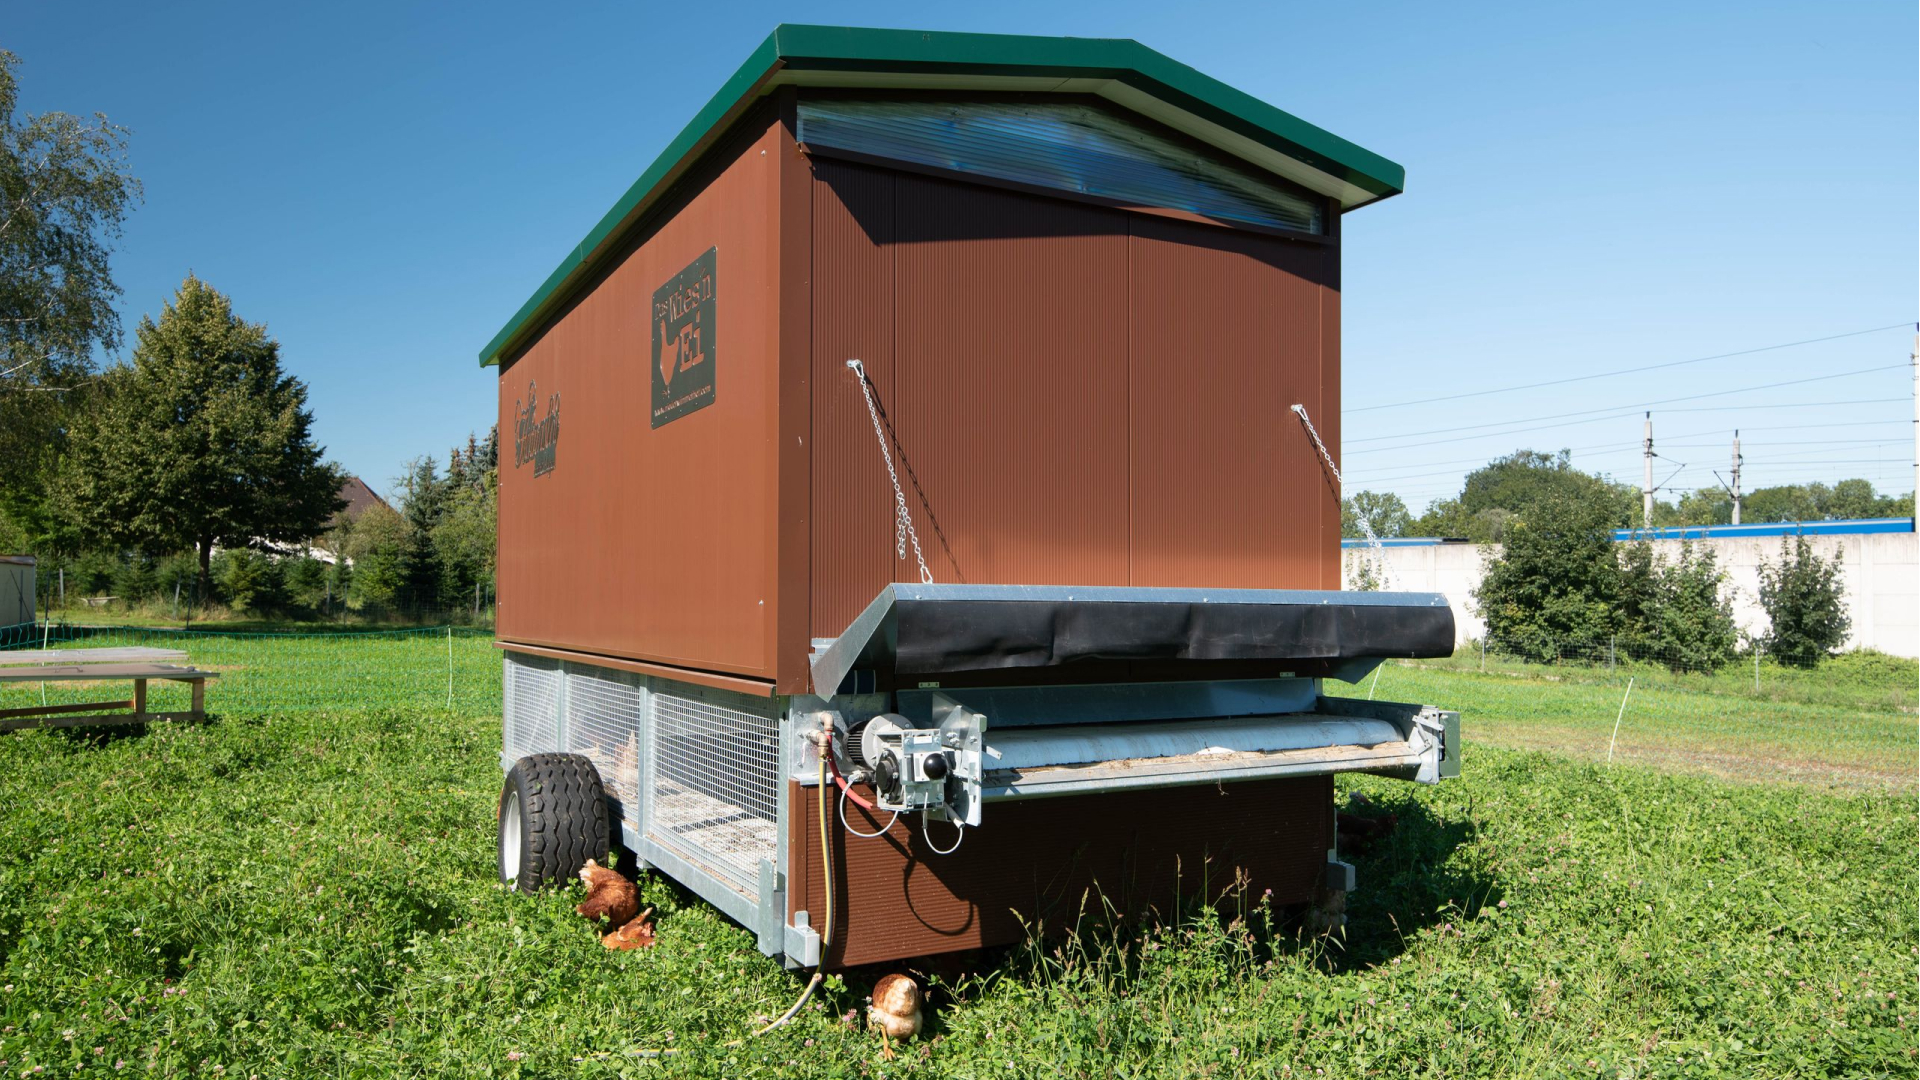 Mobile chicken coop automated with Loxone.